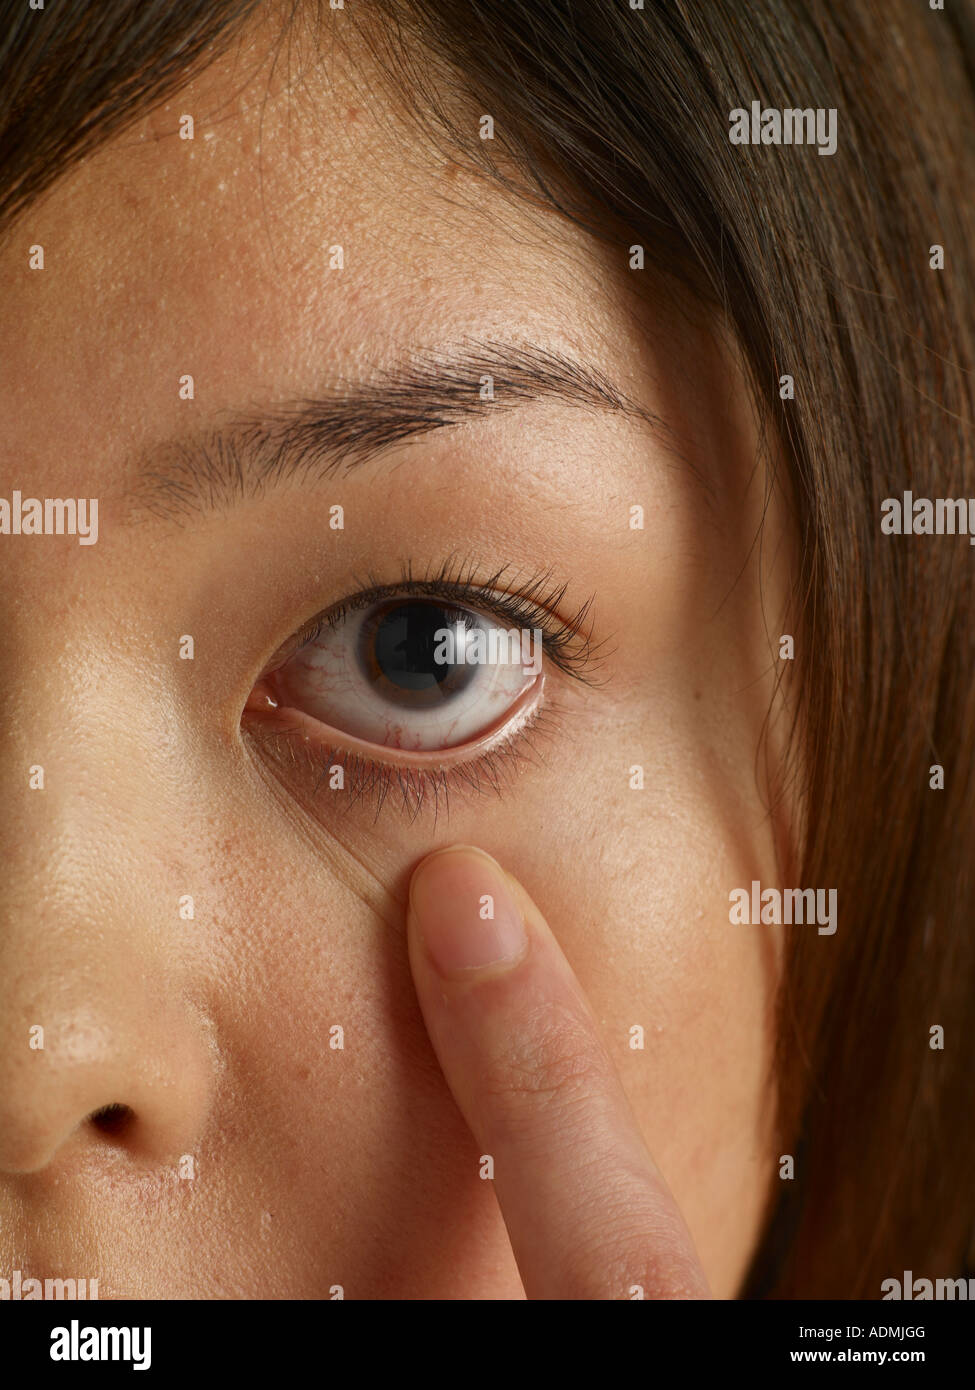 Close up of woman s tugging at her lower eyelid Stock Photo